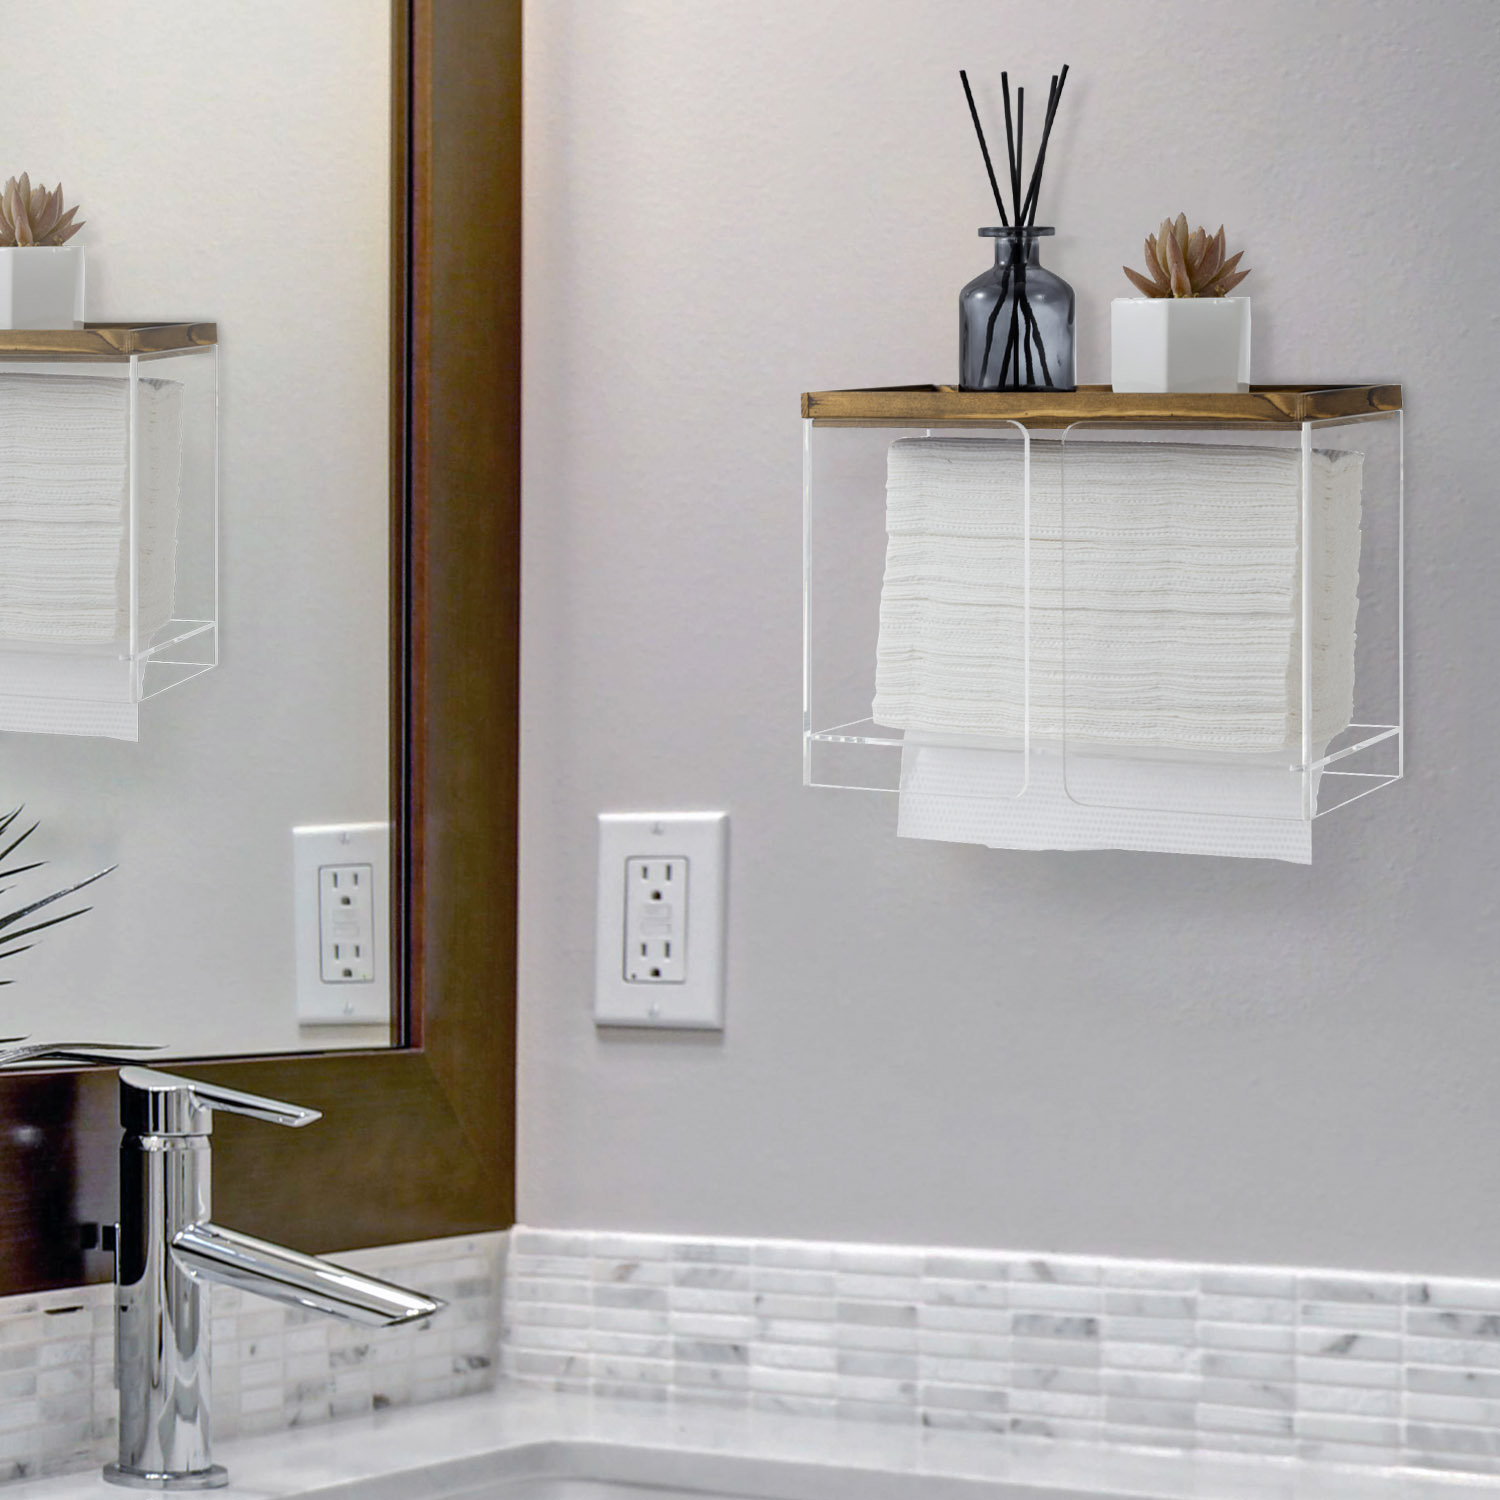 Dalton Wood Wall / Under Cabinet Mounted Paper Towel Holder